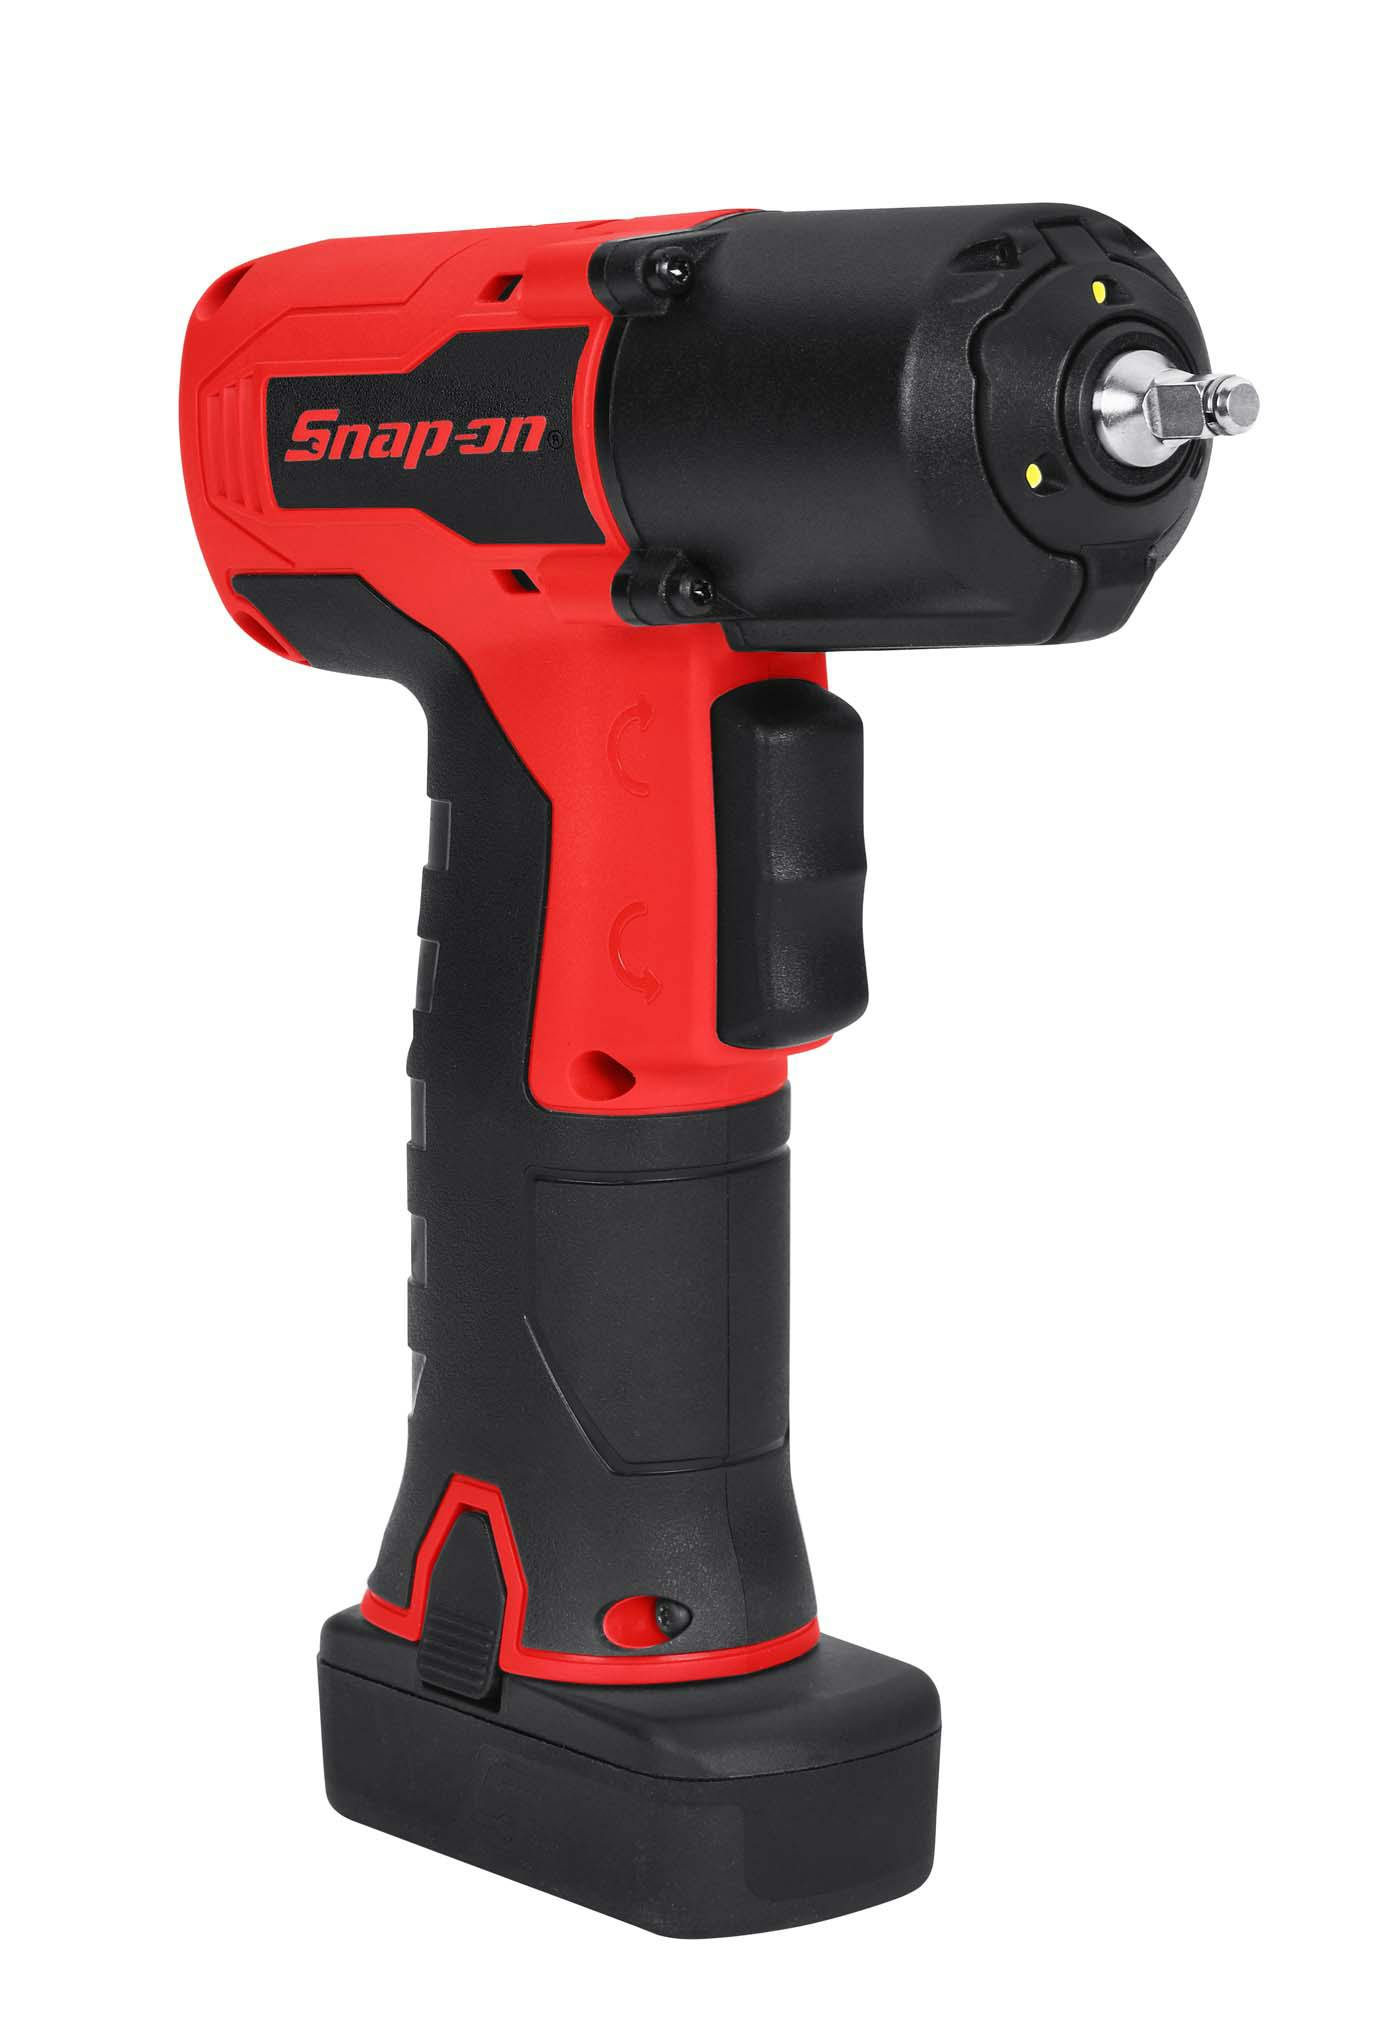 14.4 V 1/4 Drive MicroLithium Cordless Impact Wrench (Tool Only) (Red), CT825DB